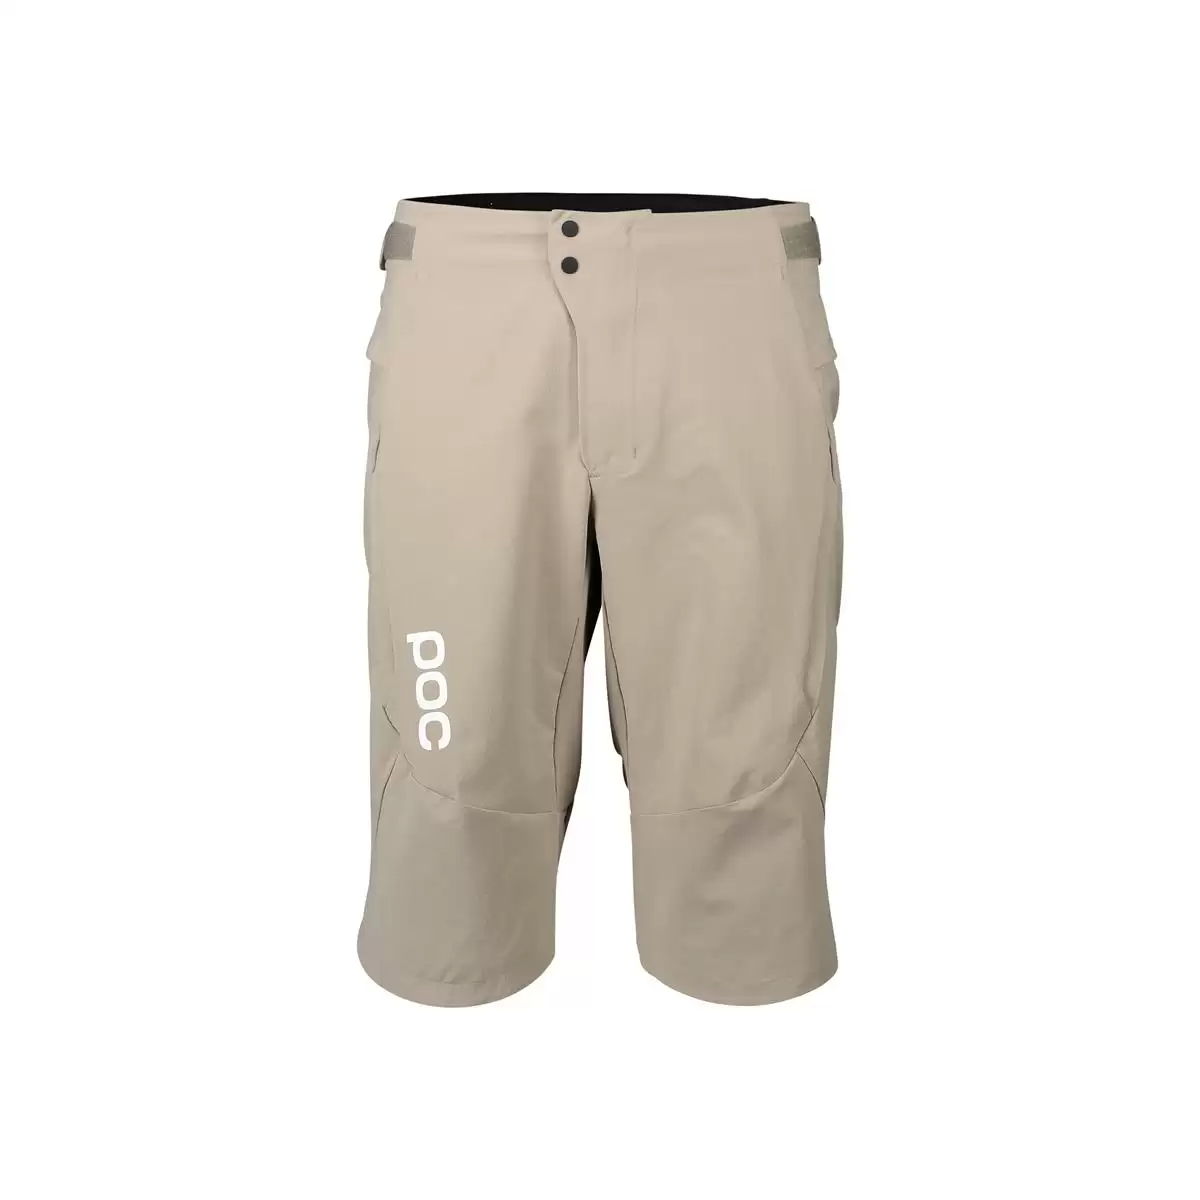 M's Infinite All-mountain shorts Moonstone Grey size S - image